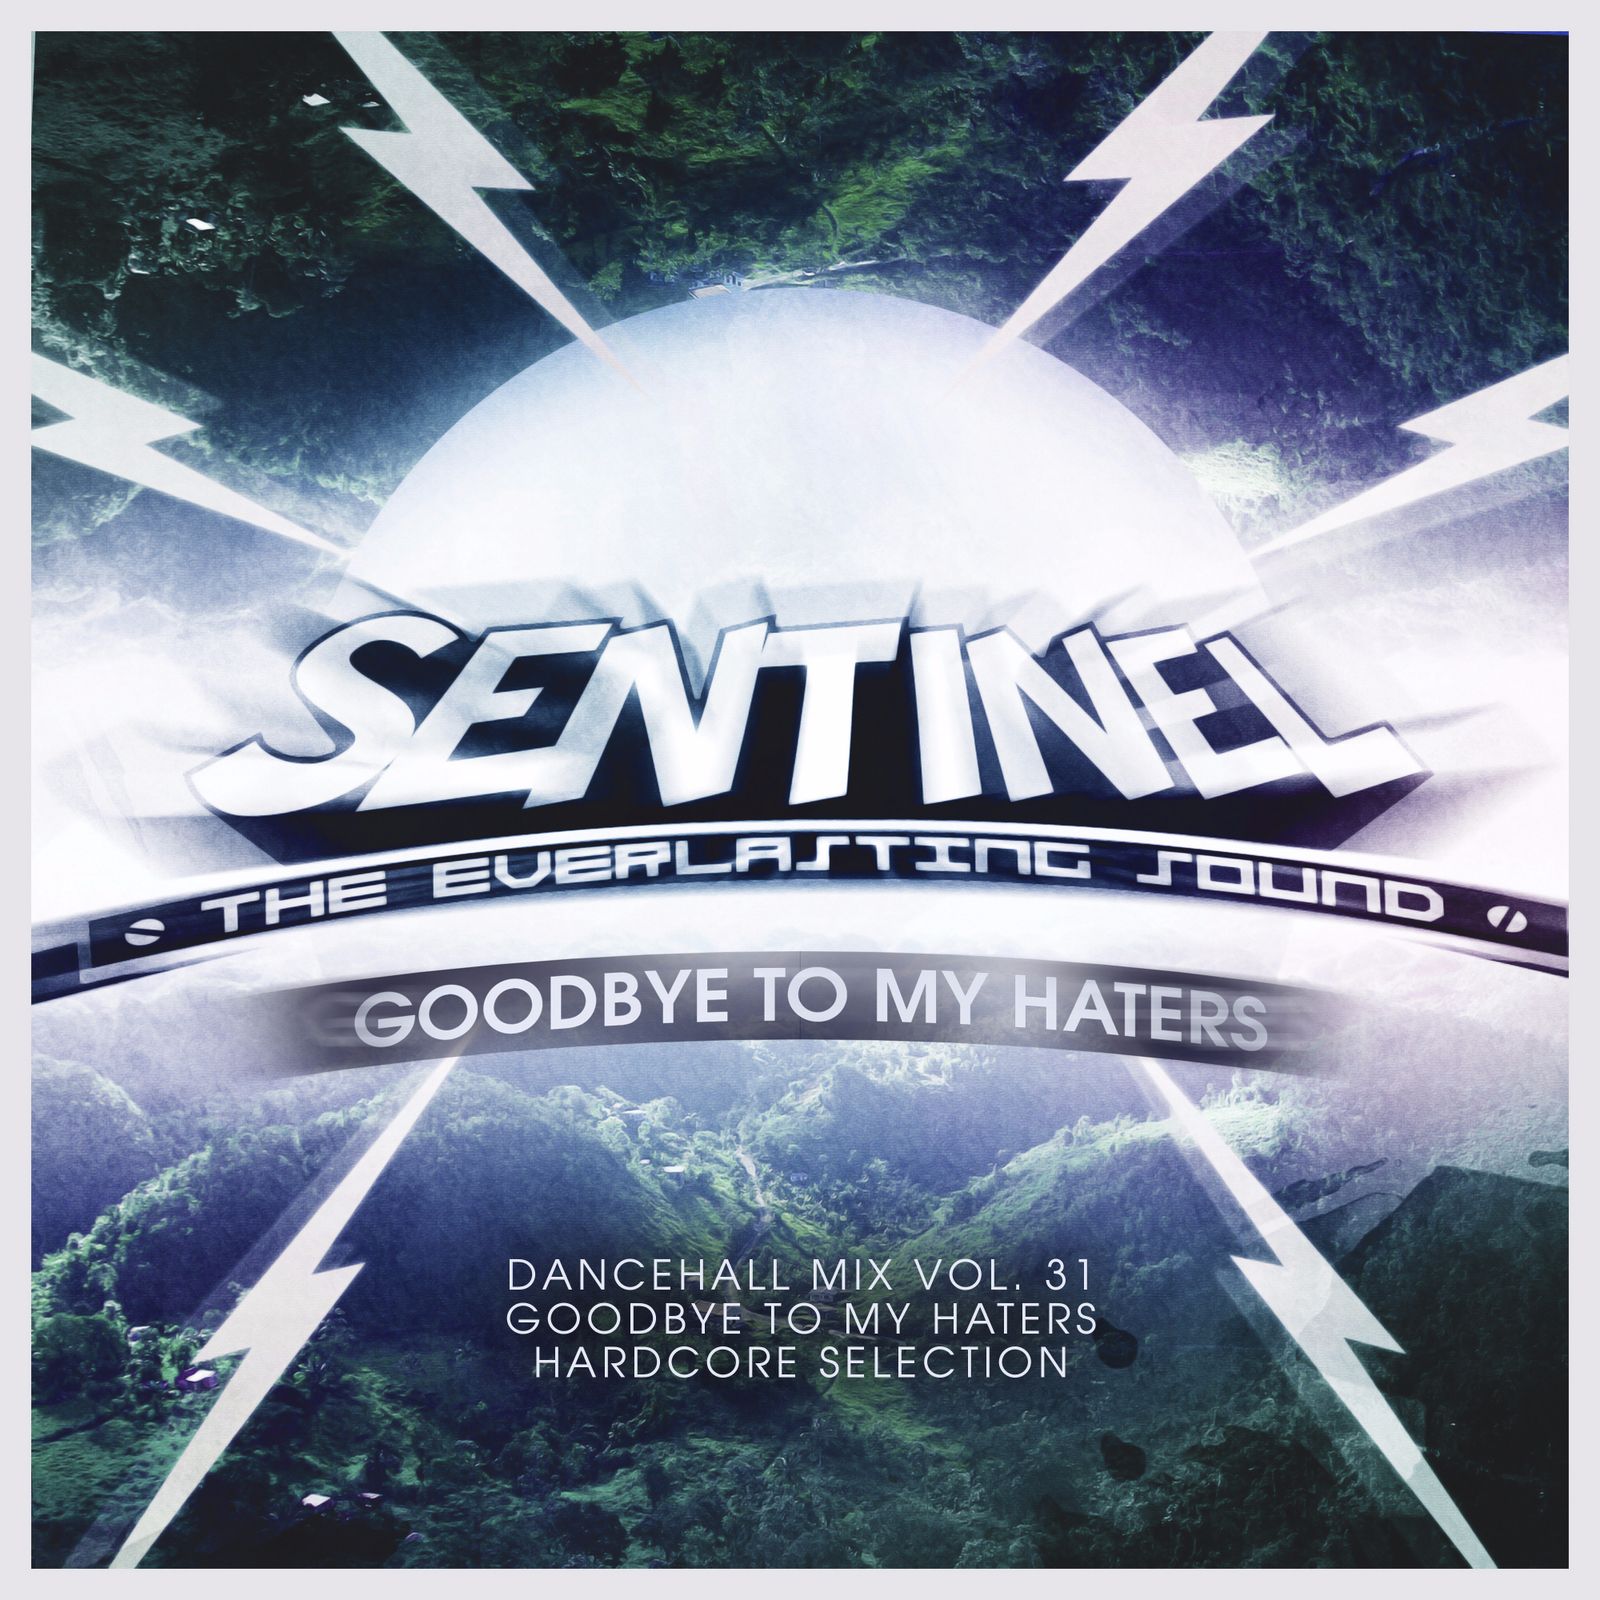 Sentinel Sound - Dancehall Mix Vol 31 – Hardcore Selection - Goodbye To My Haters [2016]